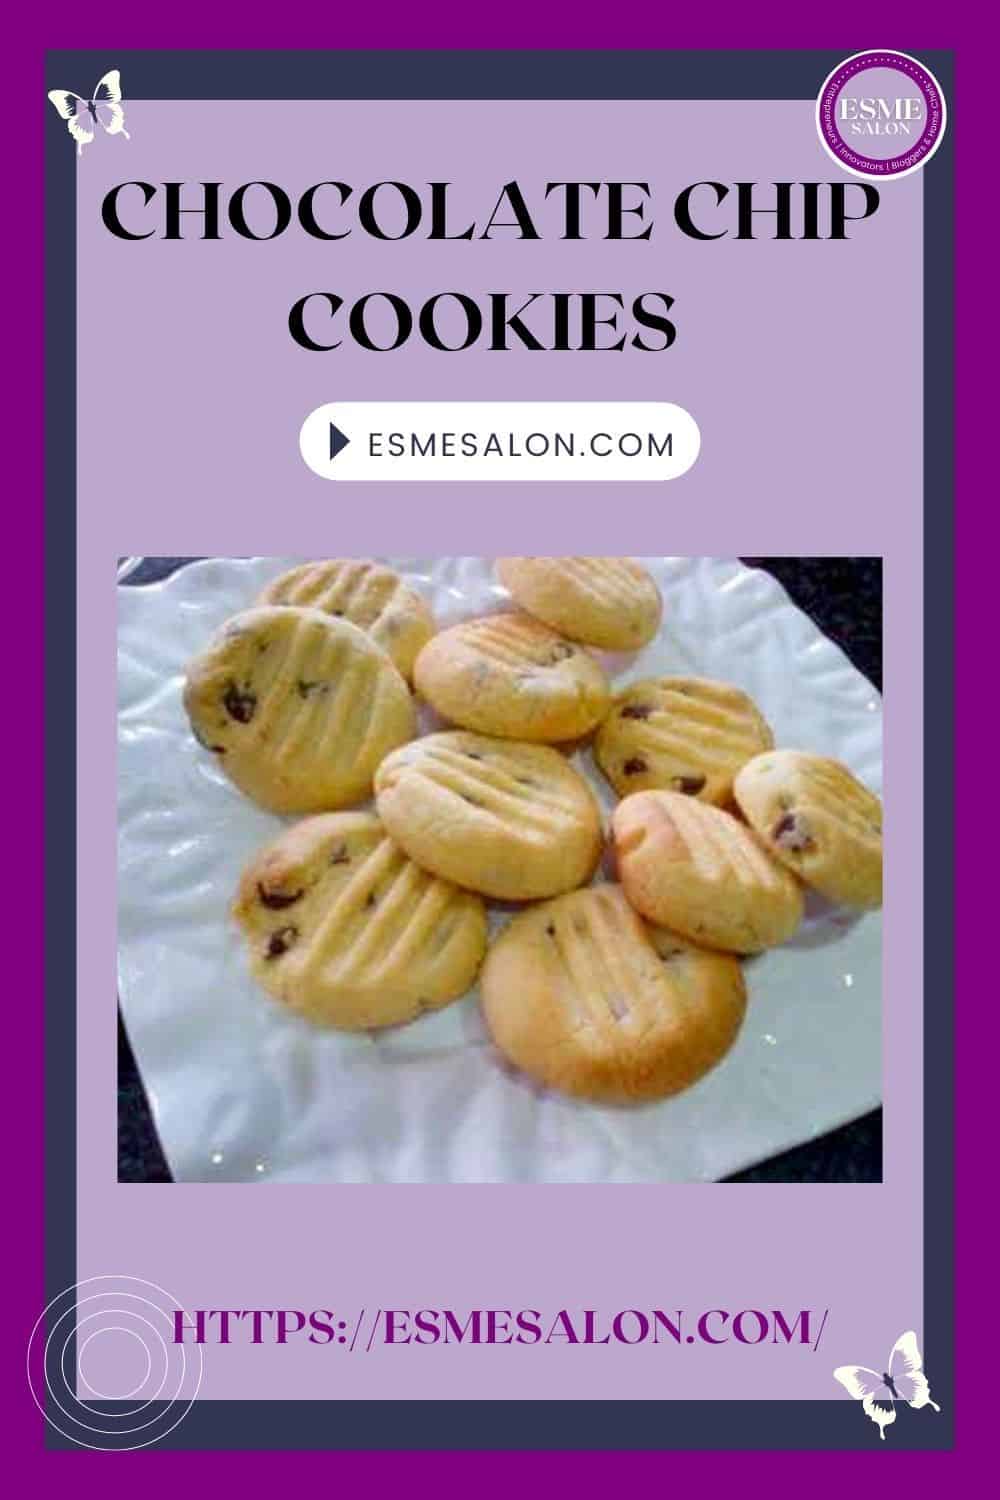 An image with a white platter filled with Chocolate Chip Cookies